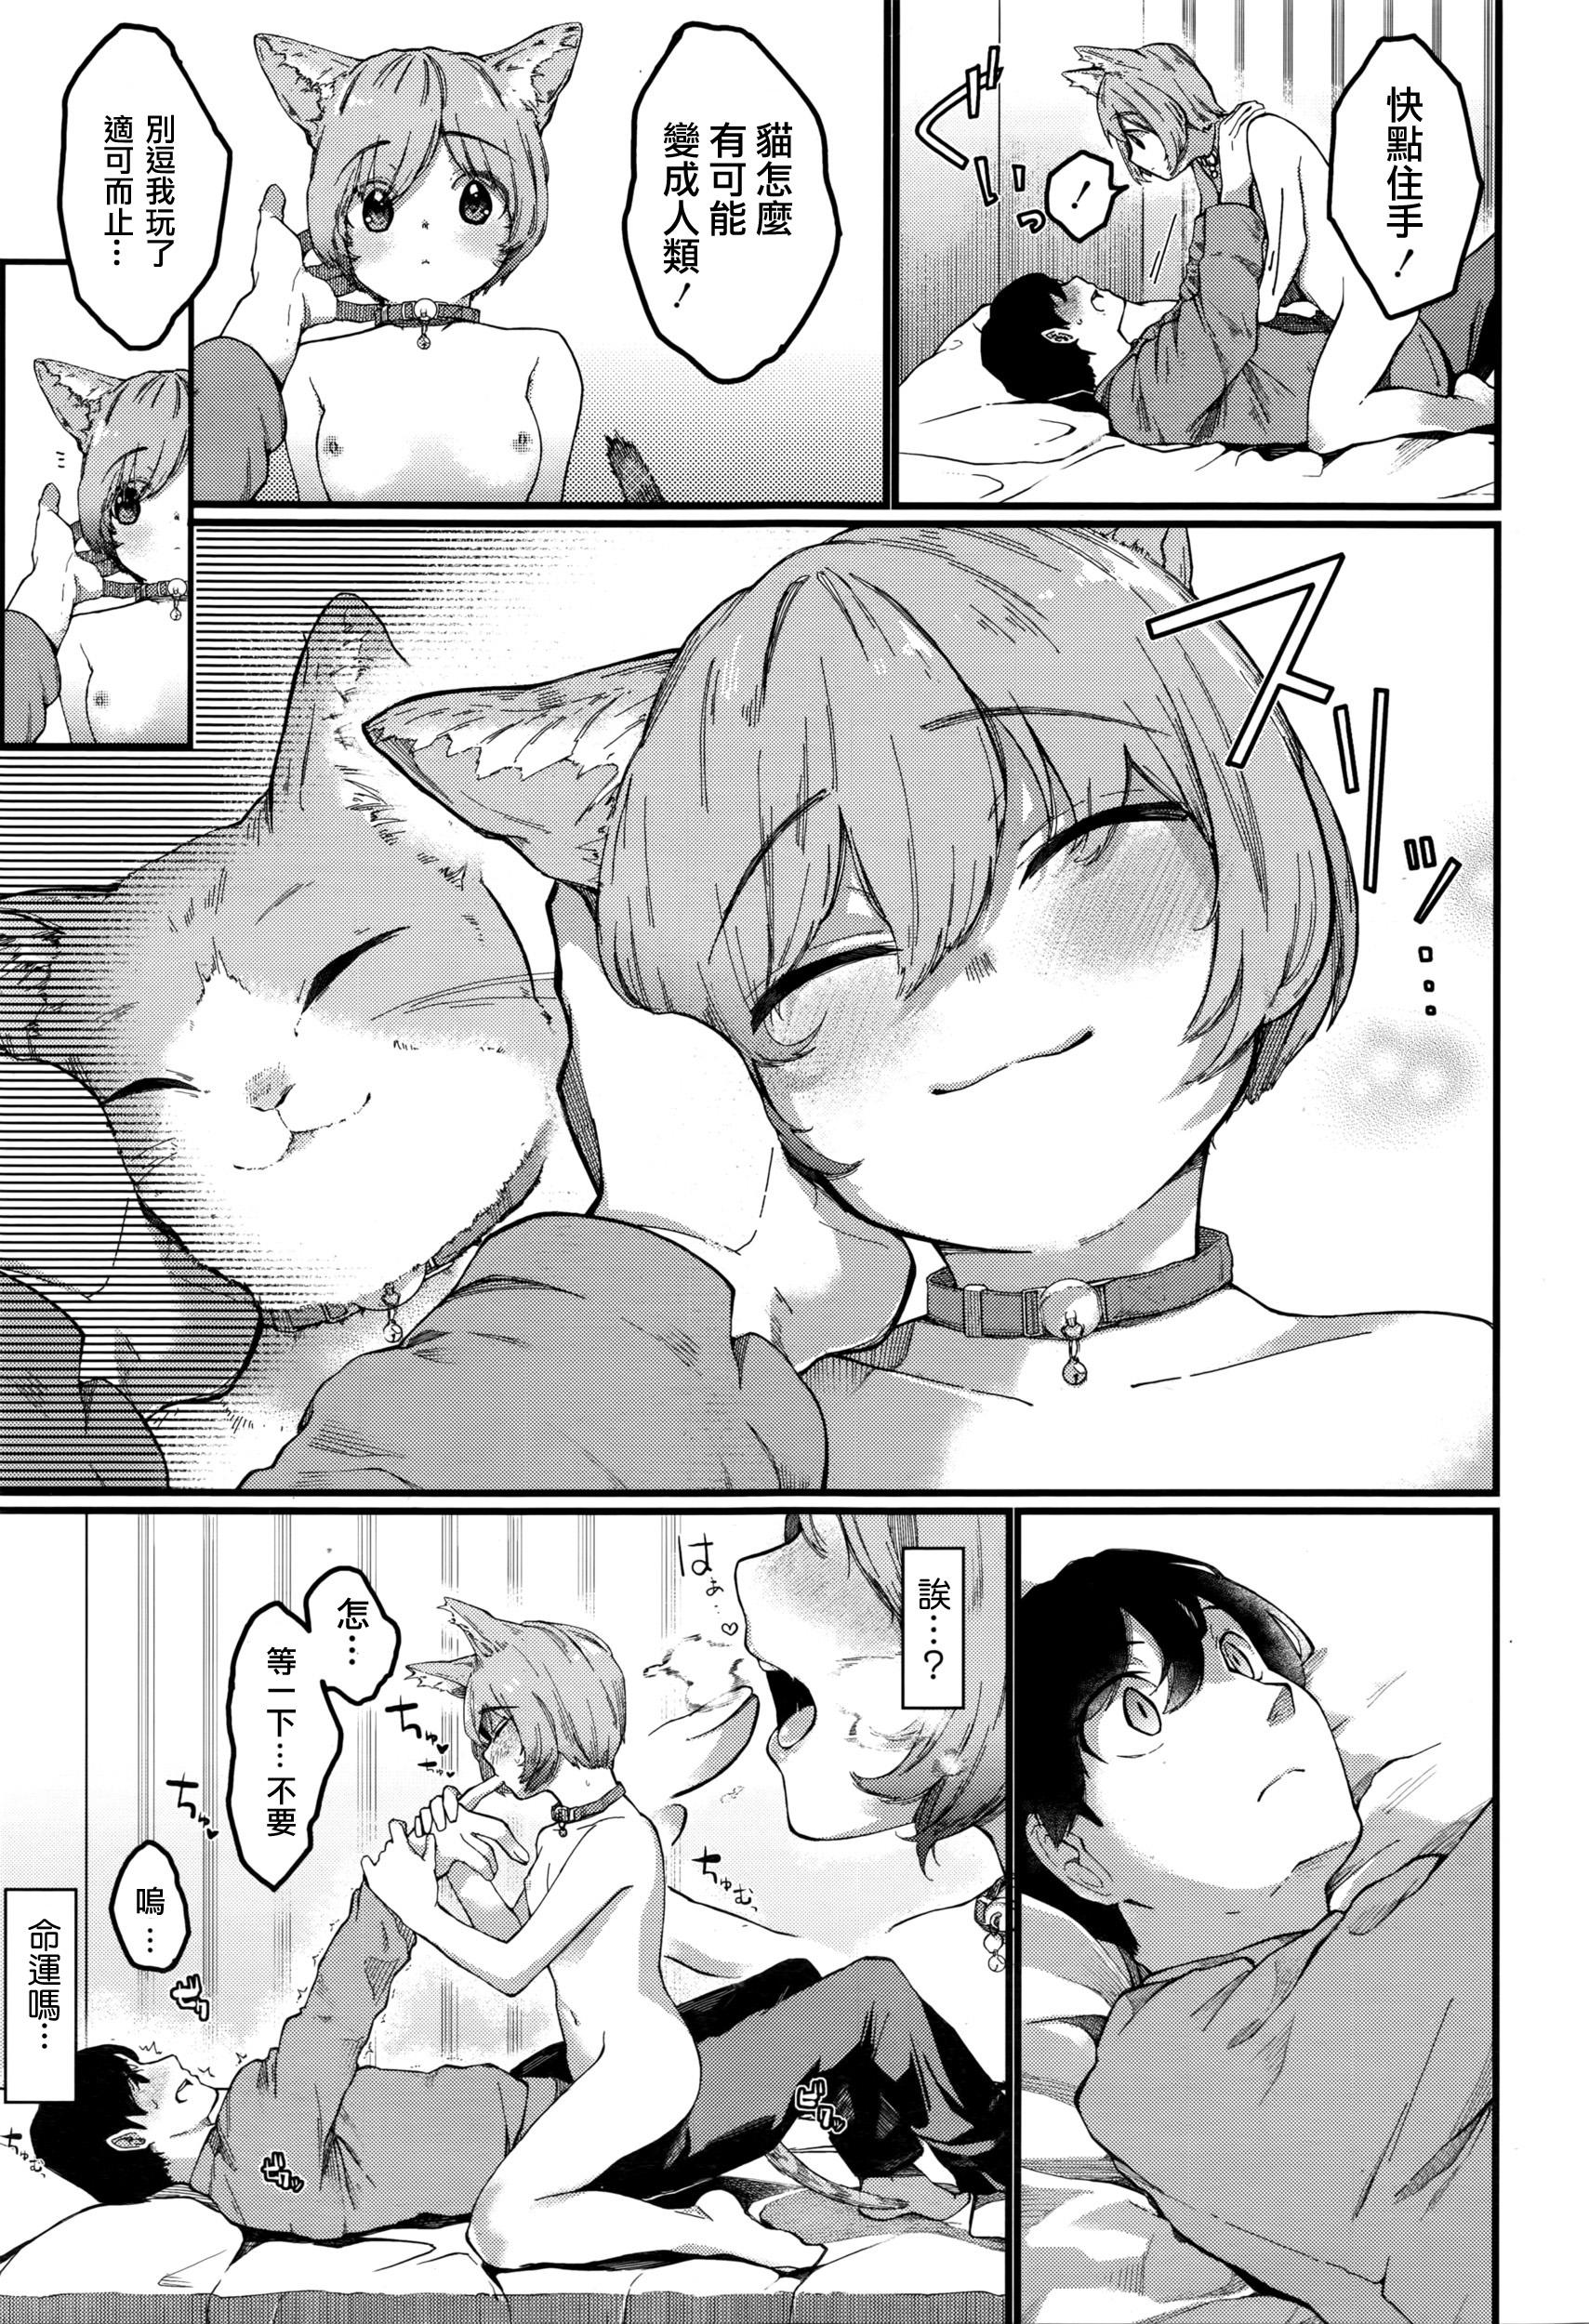 Chile Night with Nyanko Dom - Page 3